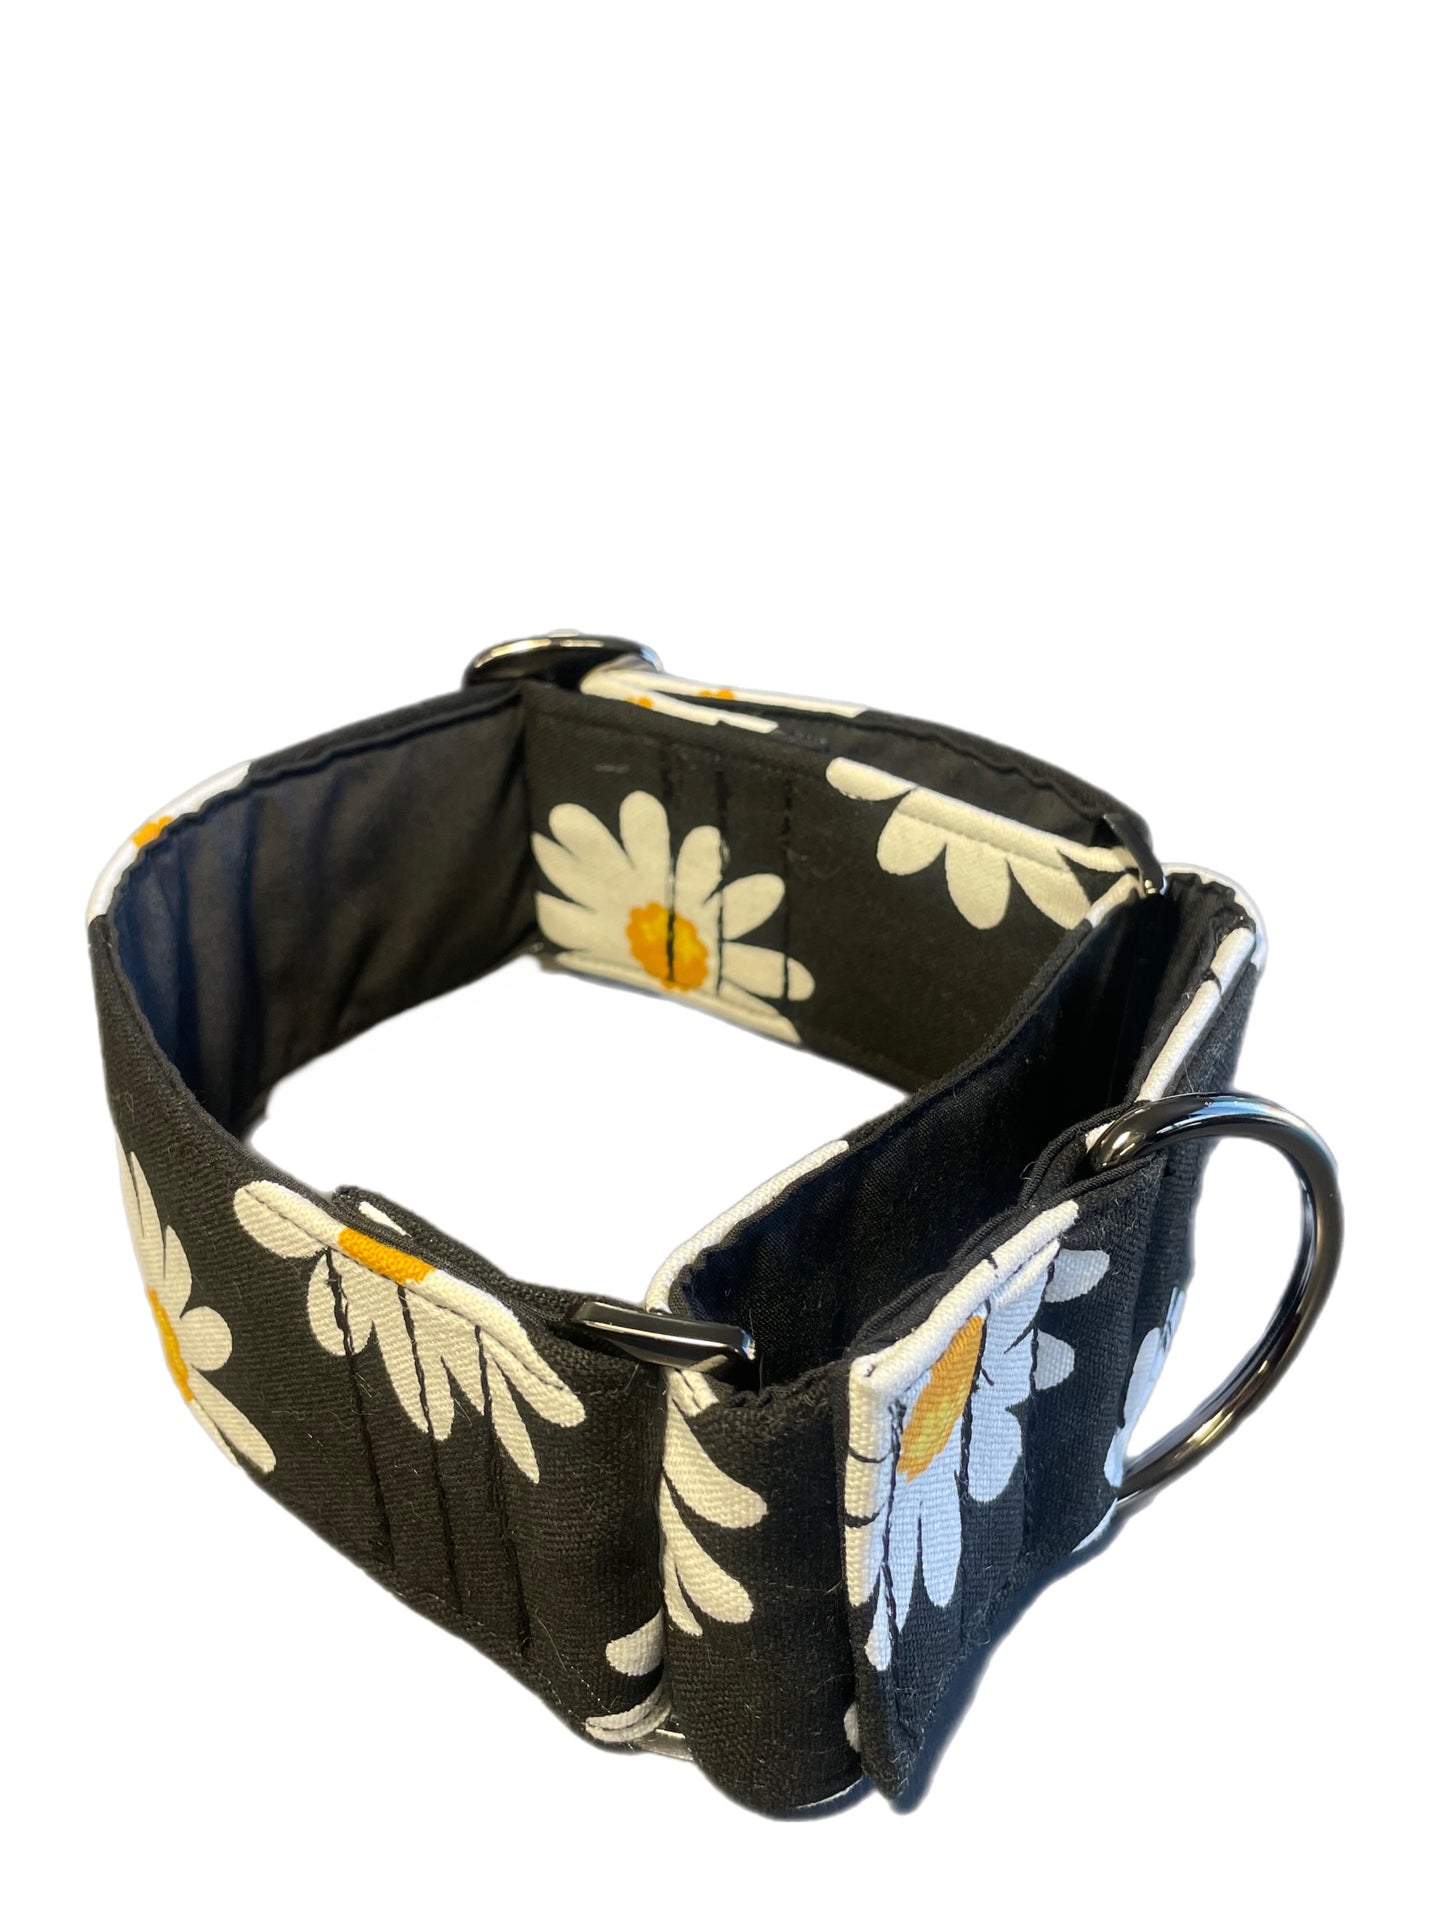 Wide Martingale collar daisies on black sturdy 50mm width